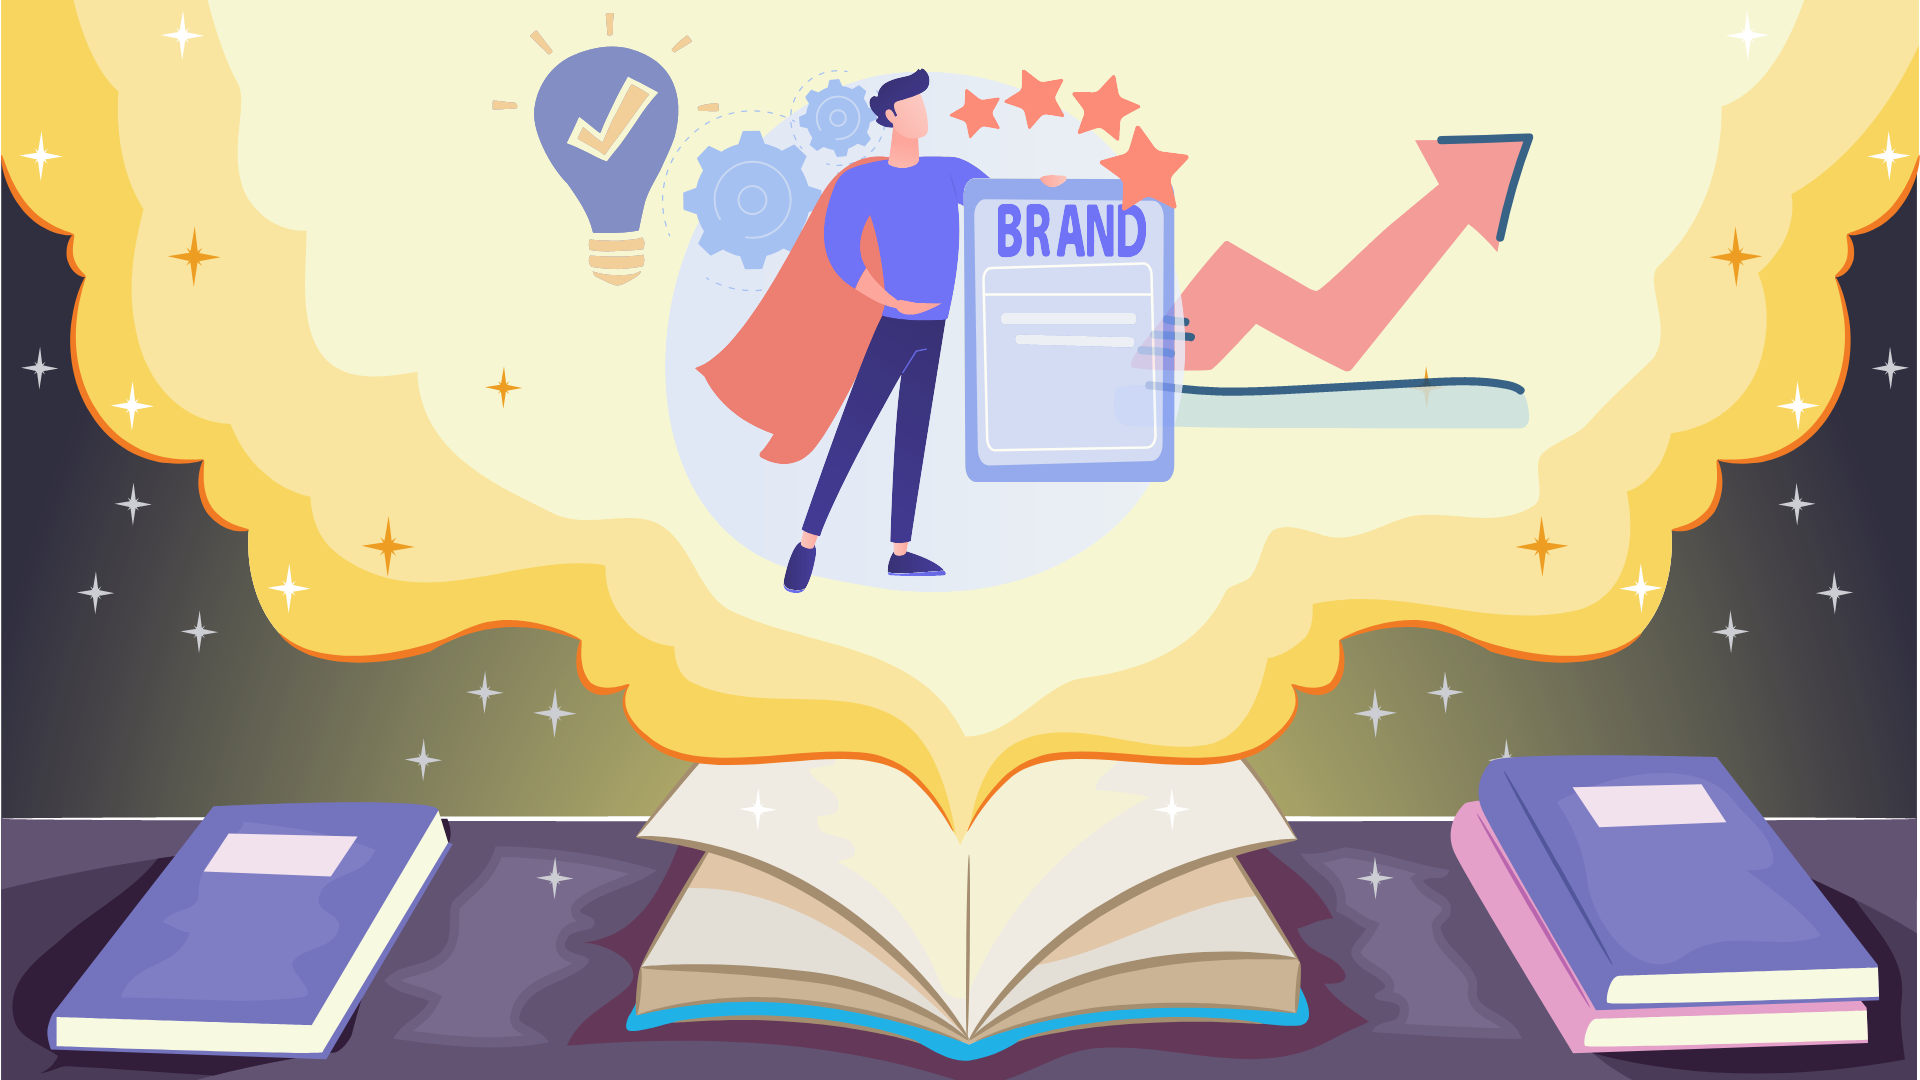 How to Tell an Effective Brand Story